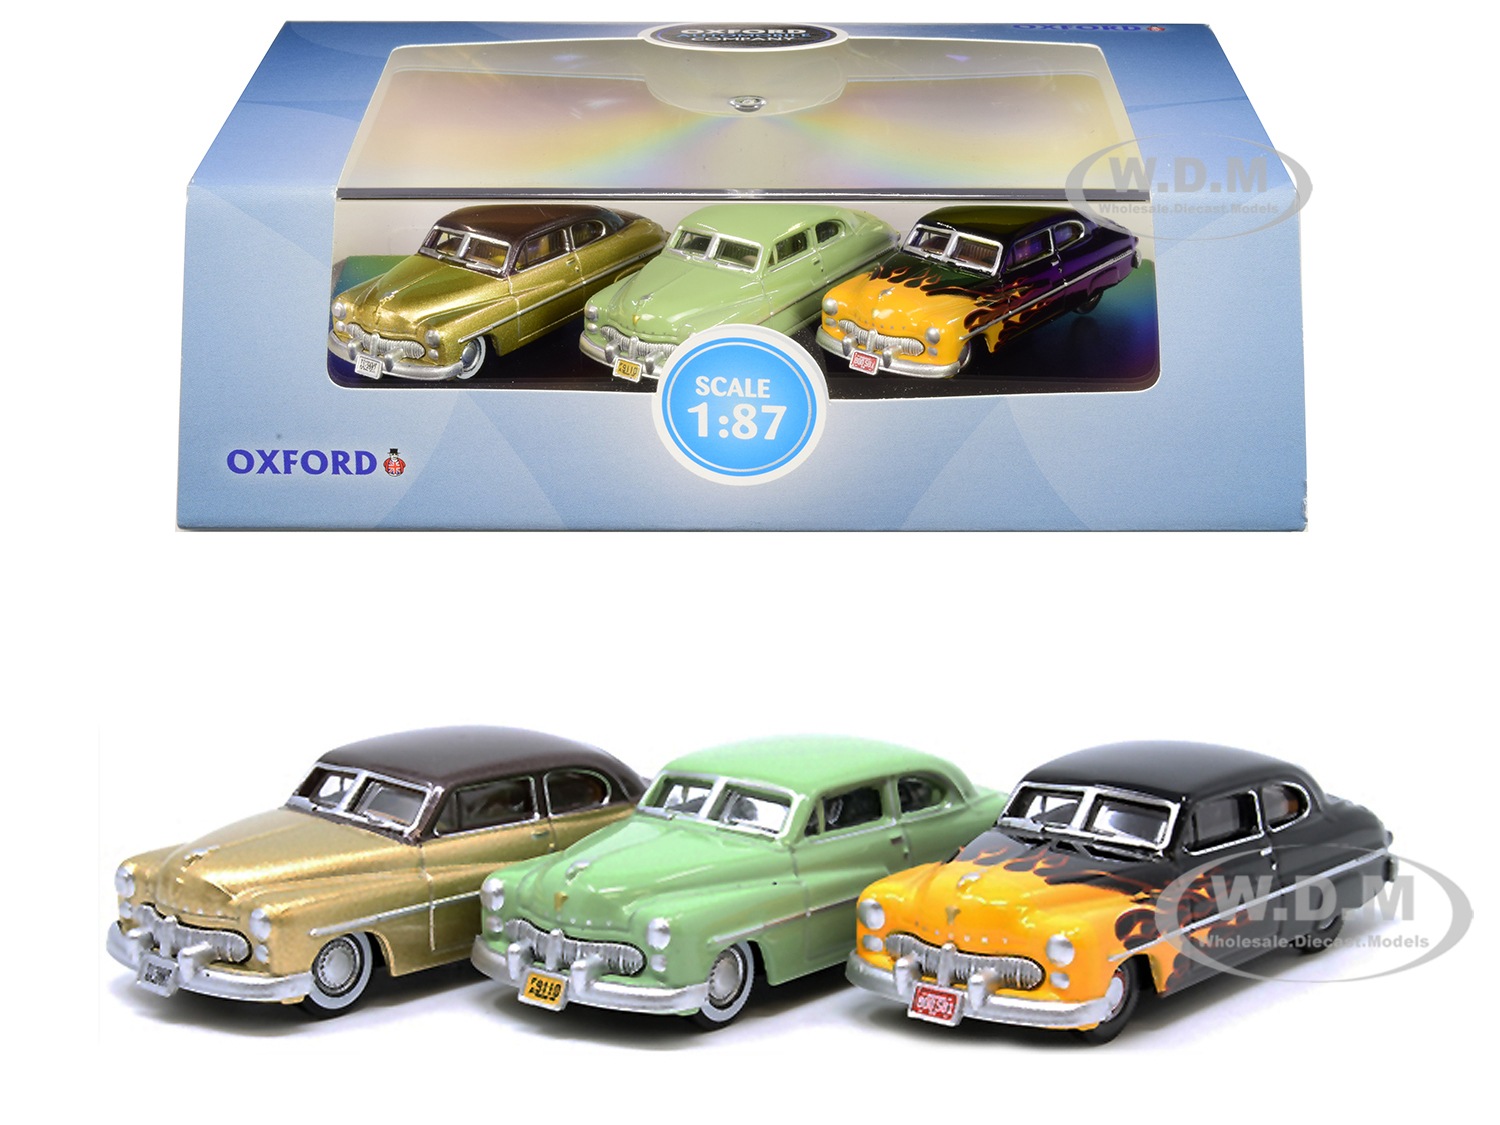 1949 Mercury Set of 3 Cars "70th Anniversary" 1/87 (HO) Scale Diecast Model Cars by Oxford Diecast